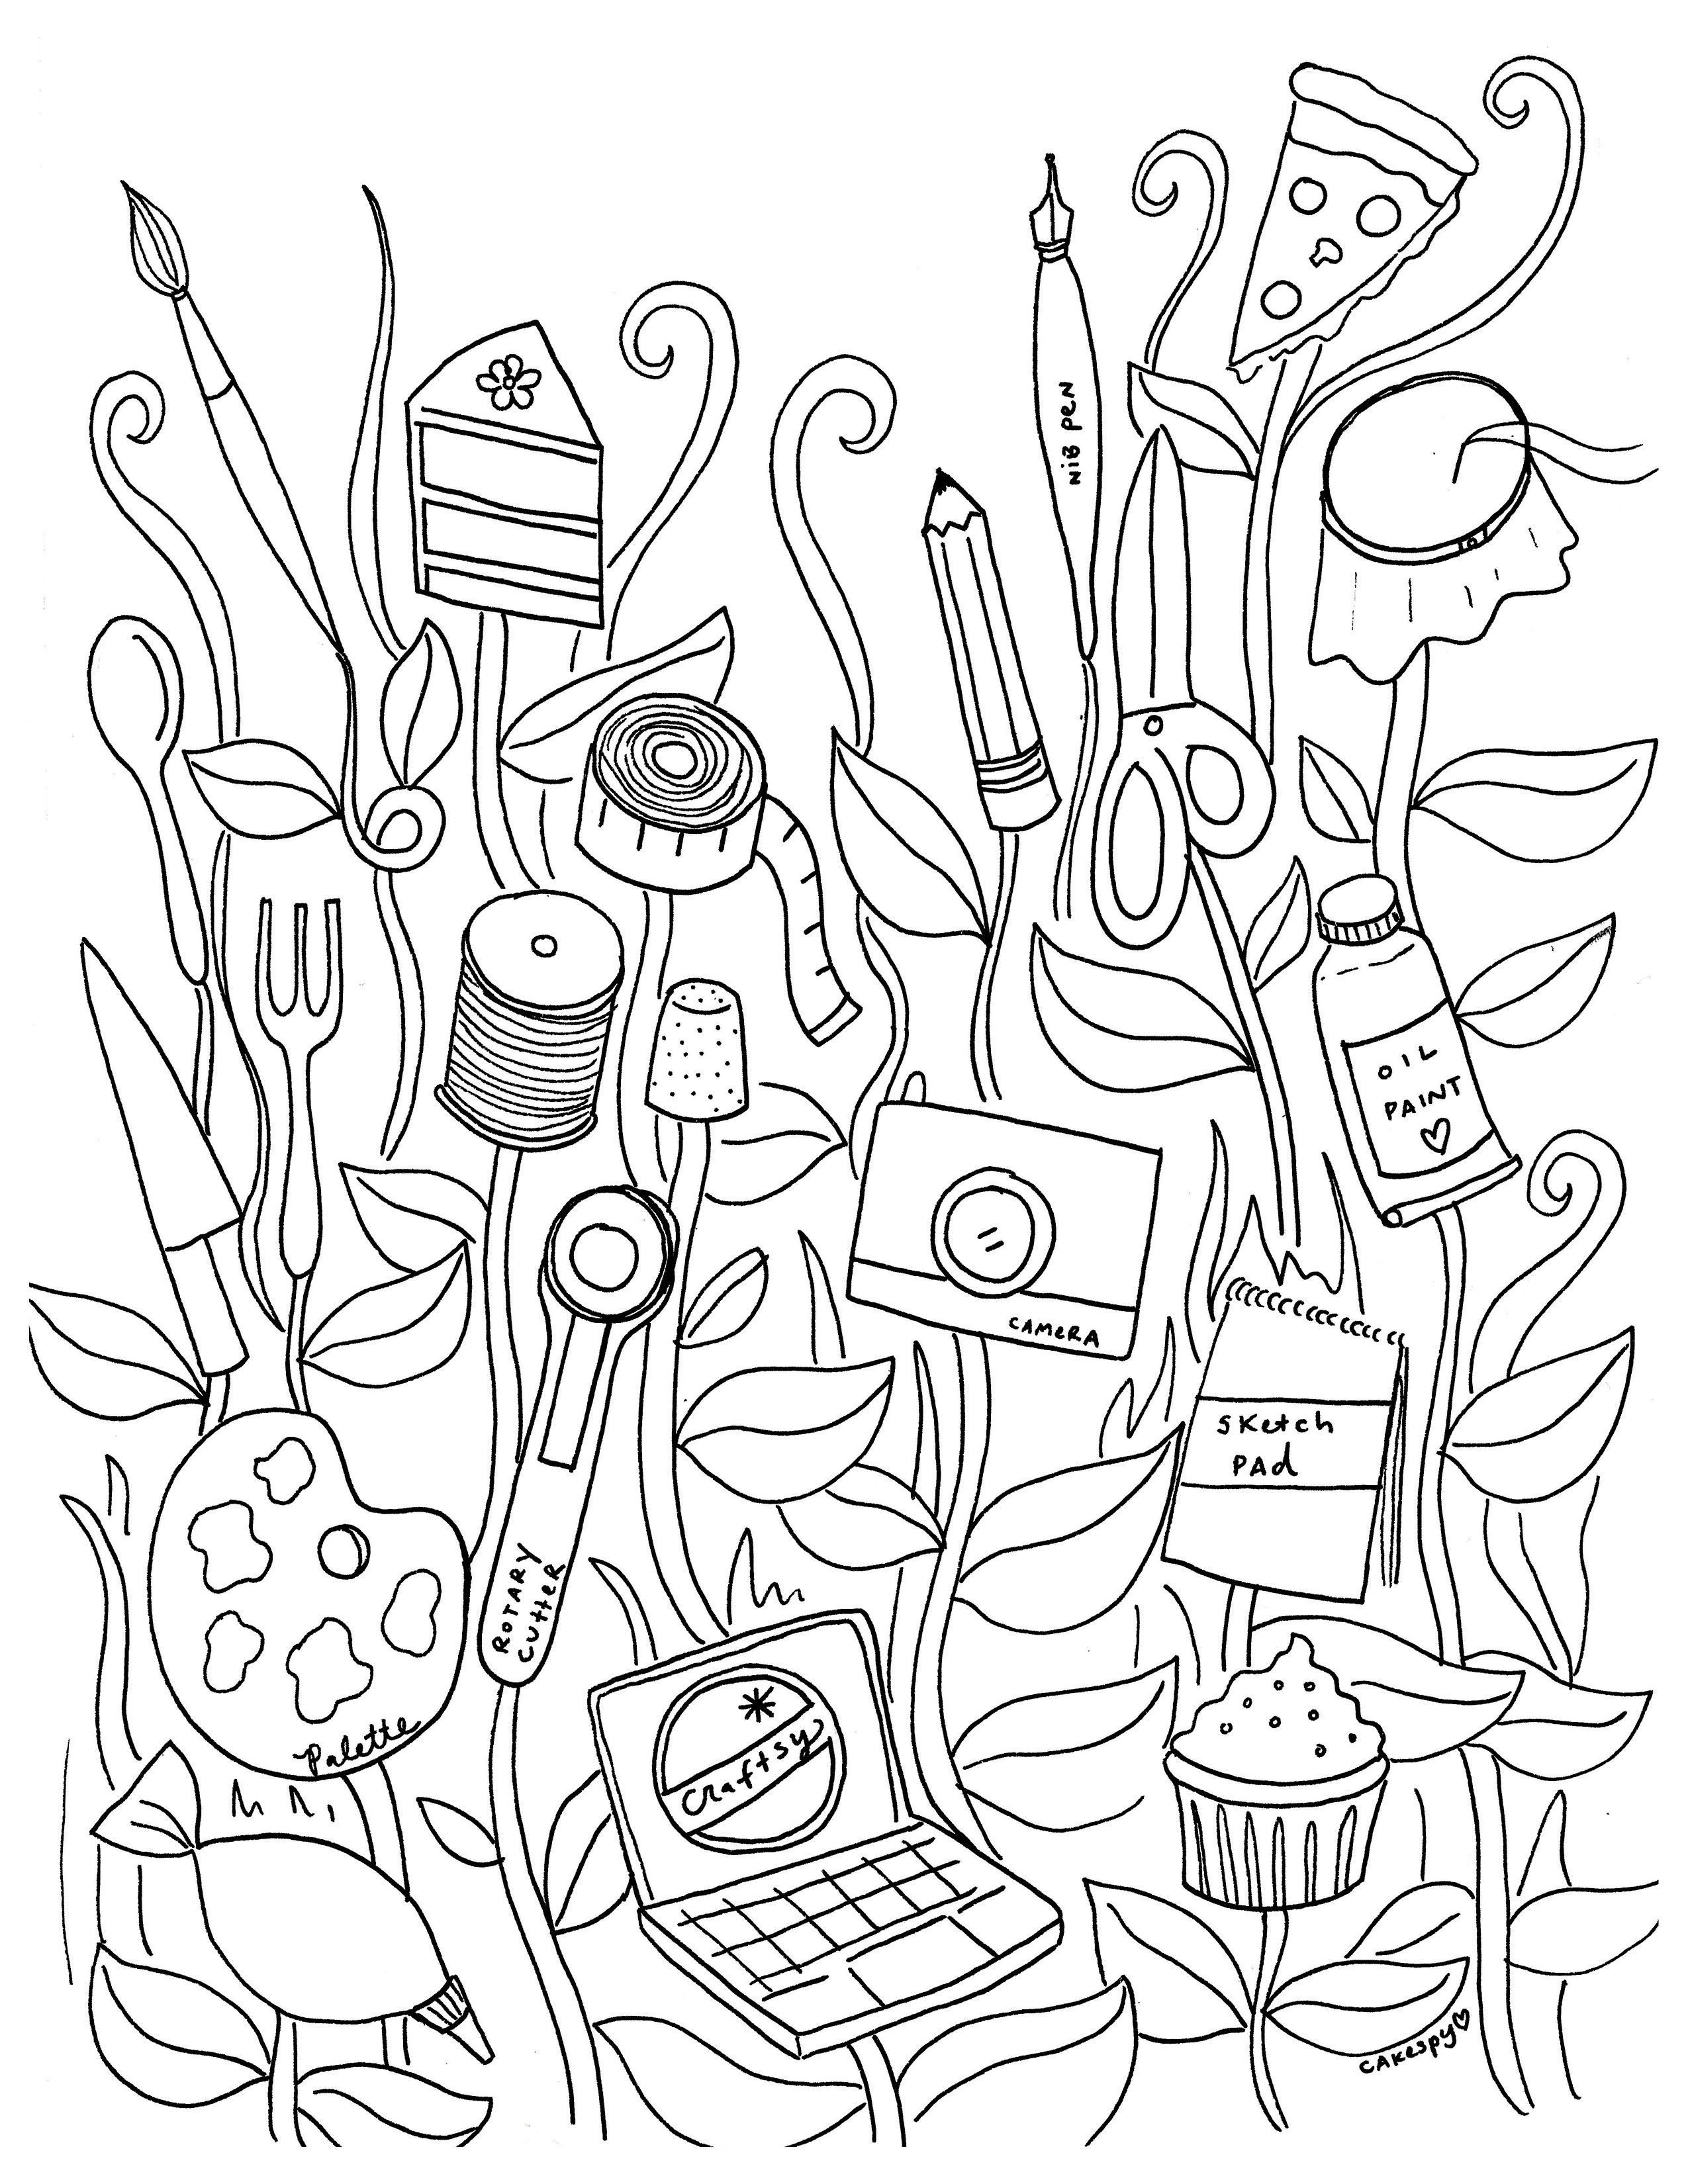 Coloring Pages For Adults Online
 Free Coloring Book Pages for Adults